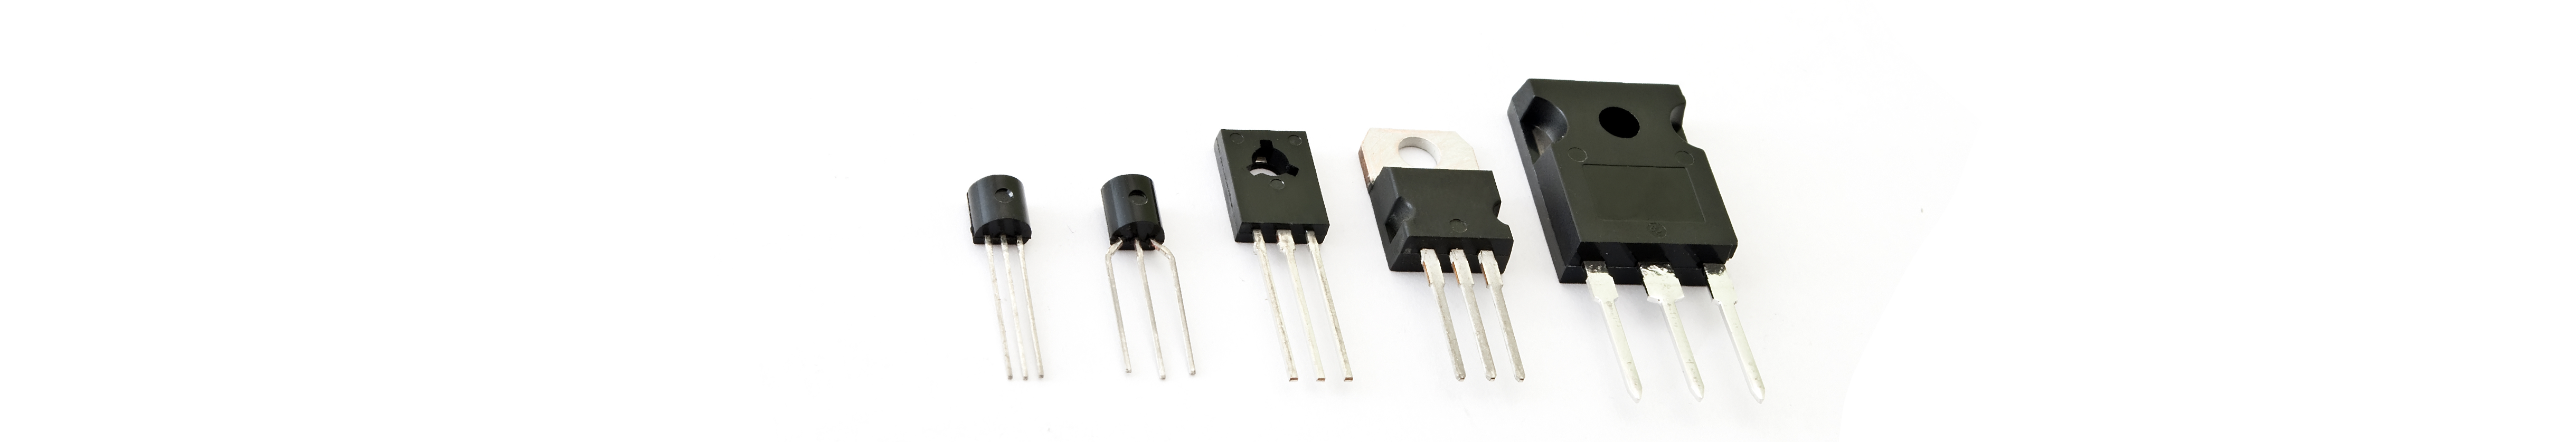 Metal Oxide Semiconductor FETS